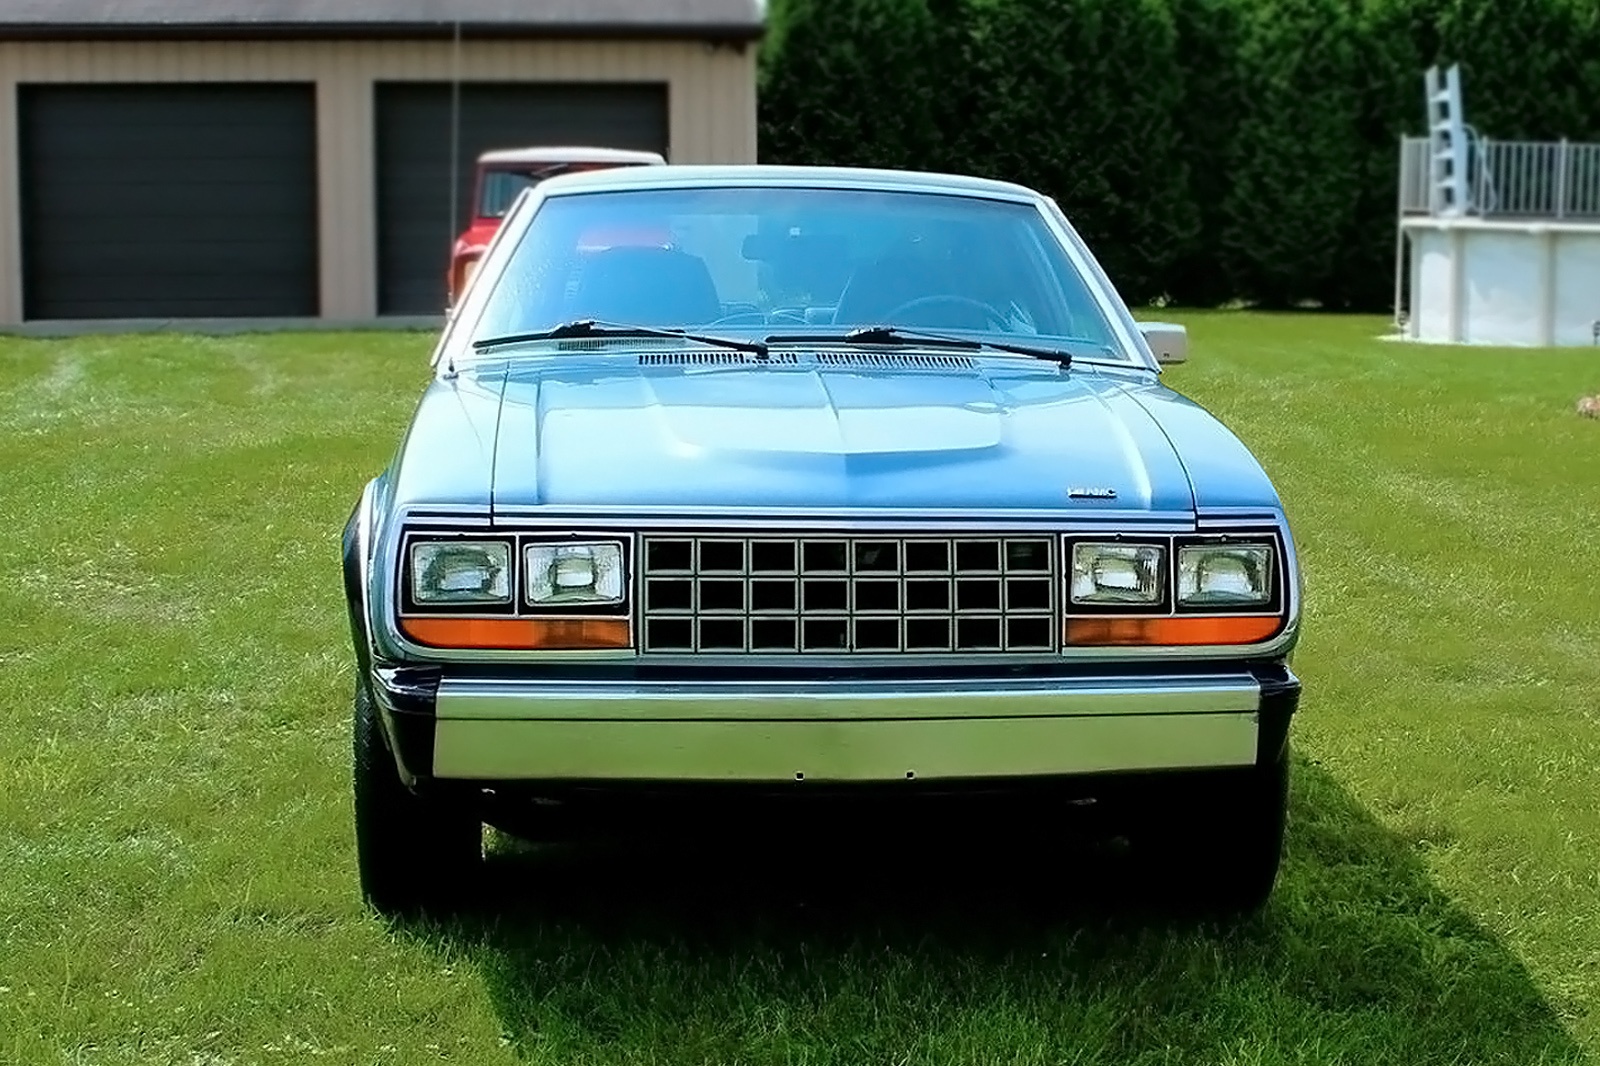 There are 5 classic amc eagles for sale today on classiccars.com. 